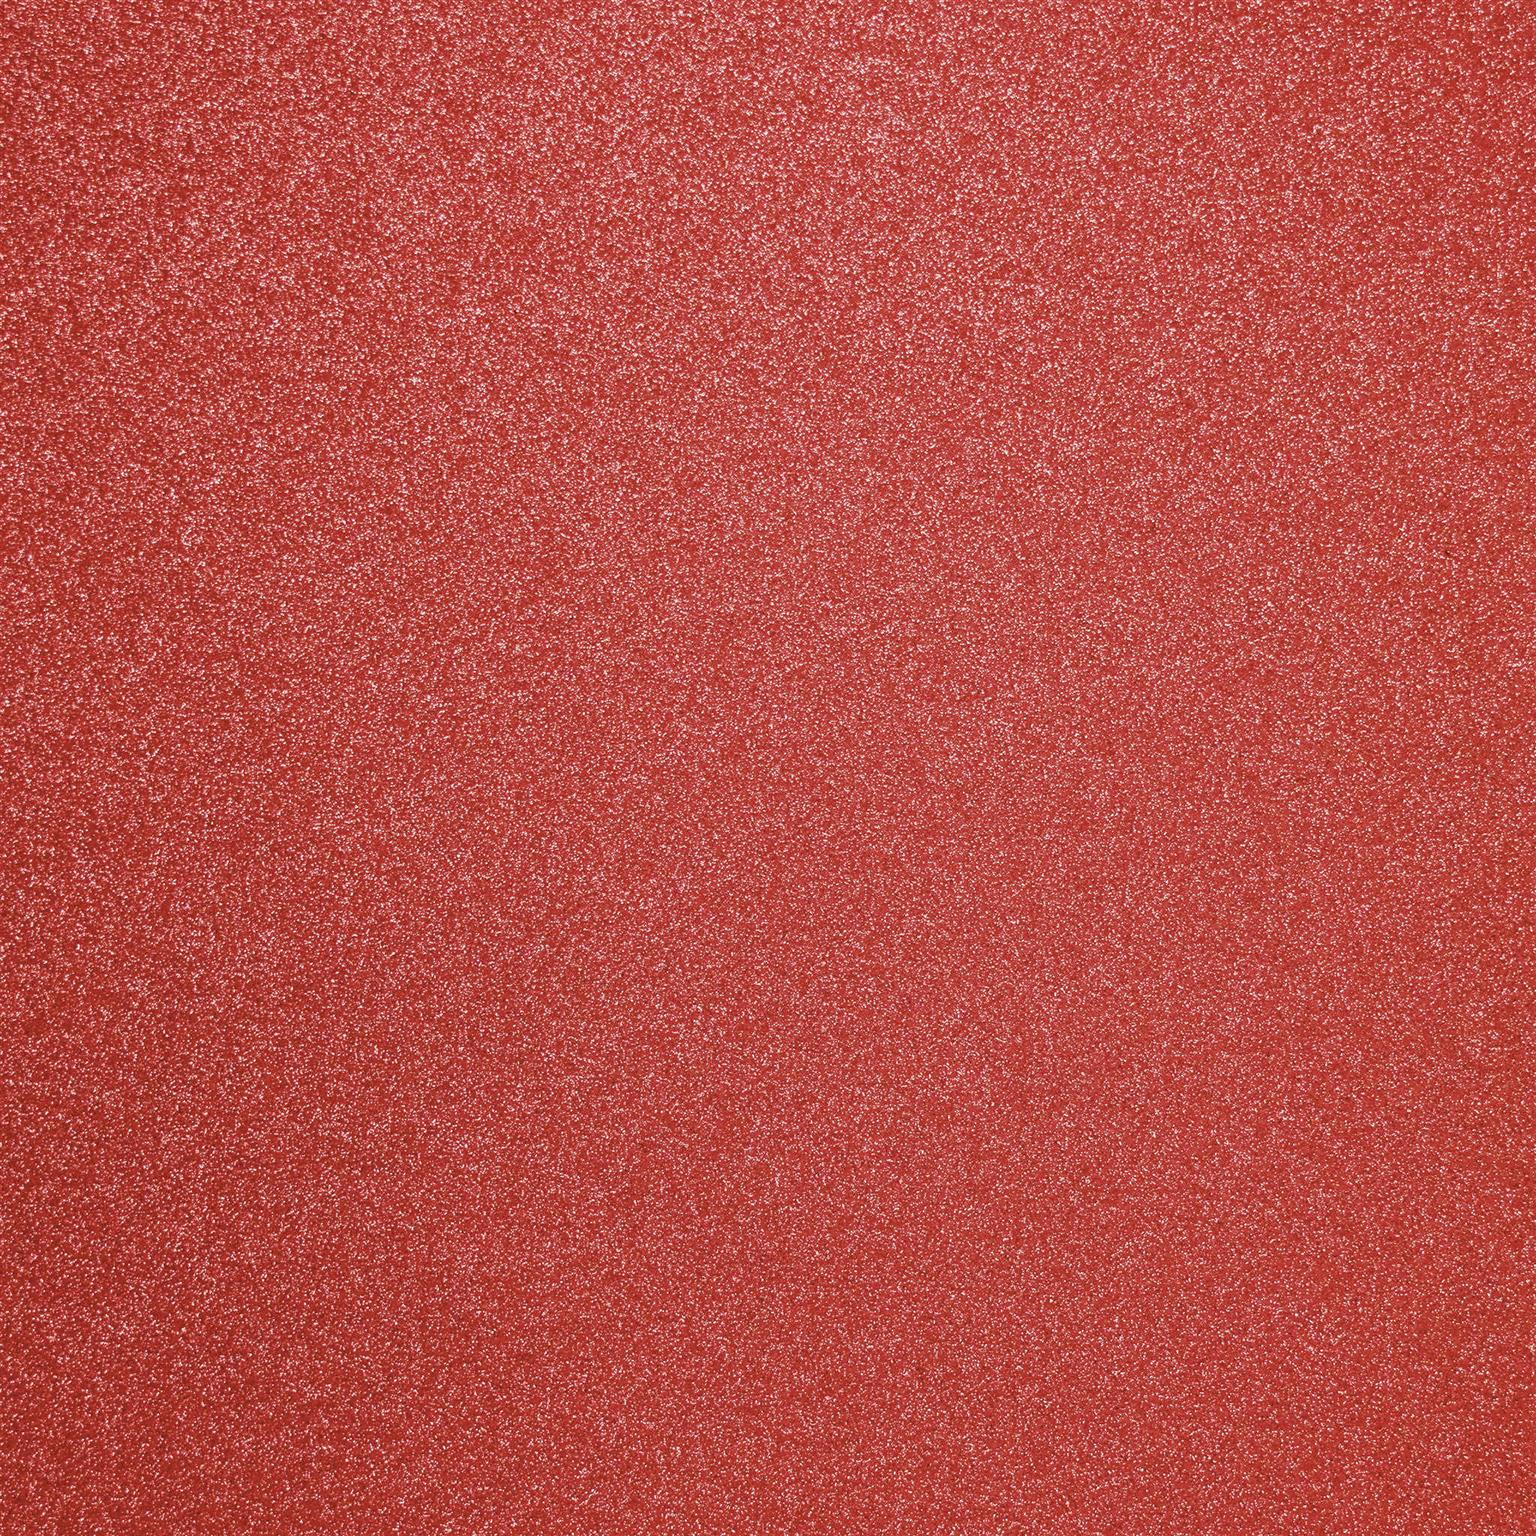 Sample of Red Shimmer 10mm Bathroom Cladding Shower Wall Panels